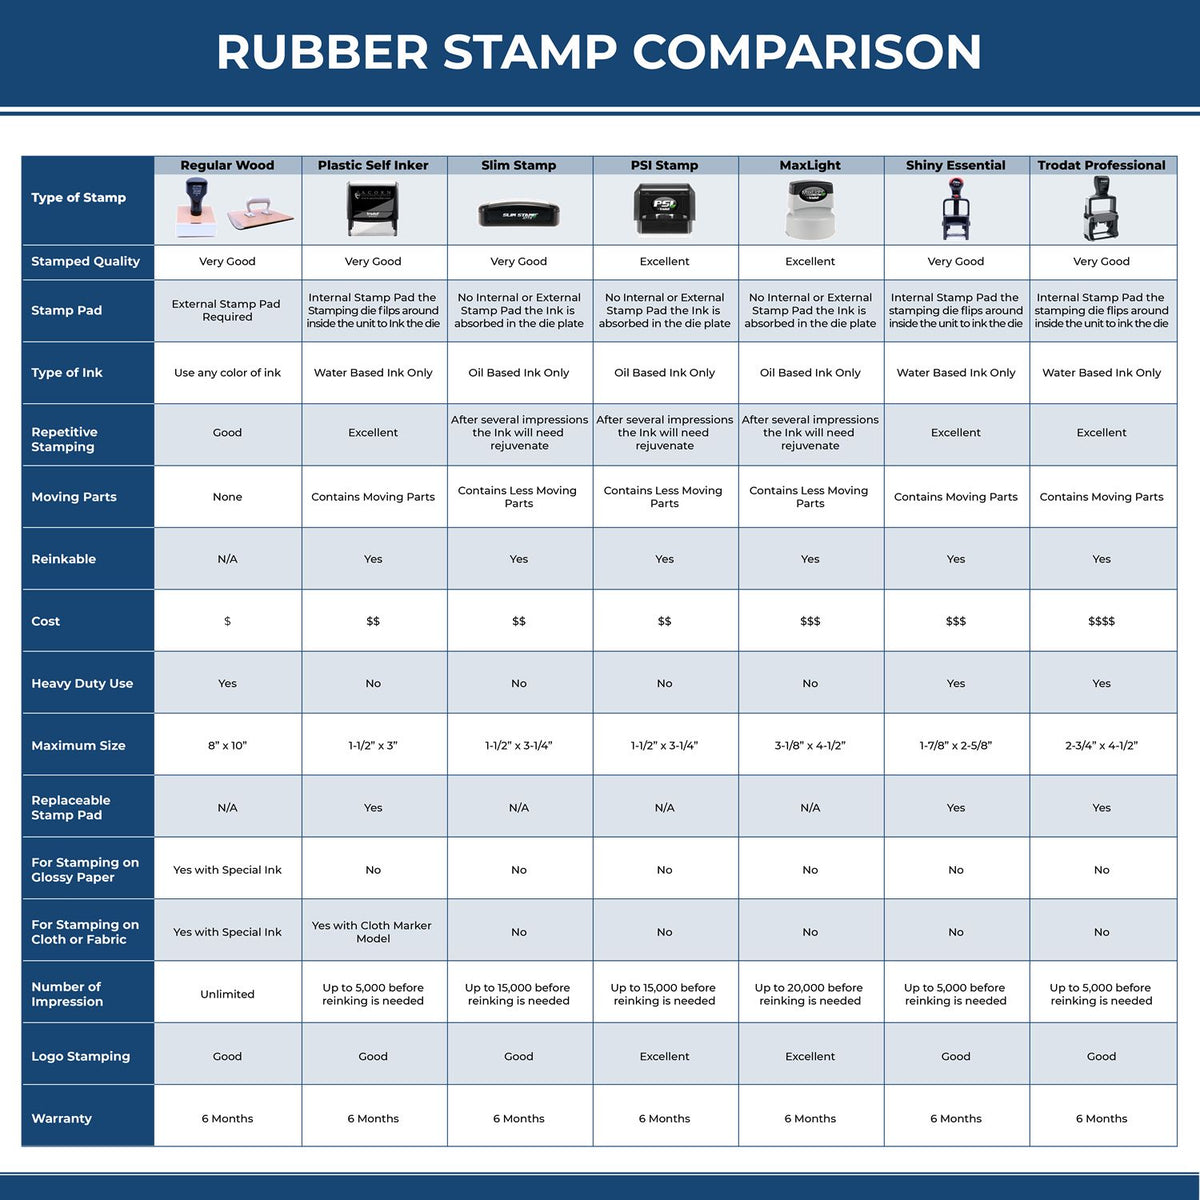 A comparison chart for the different types of mount models available for the Super Slim Maine Notary Public Stamp.